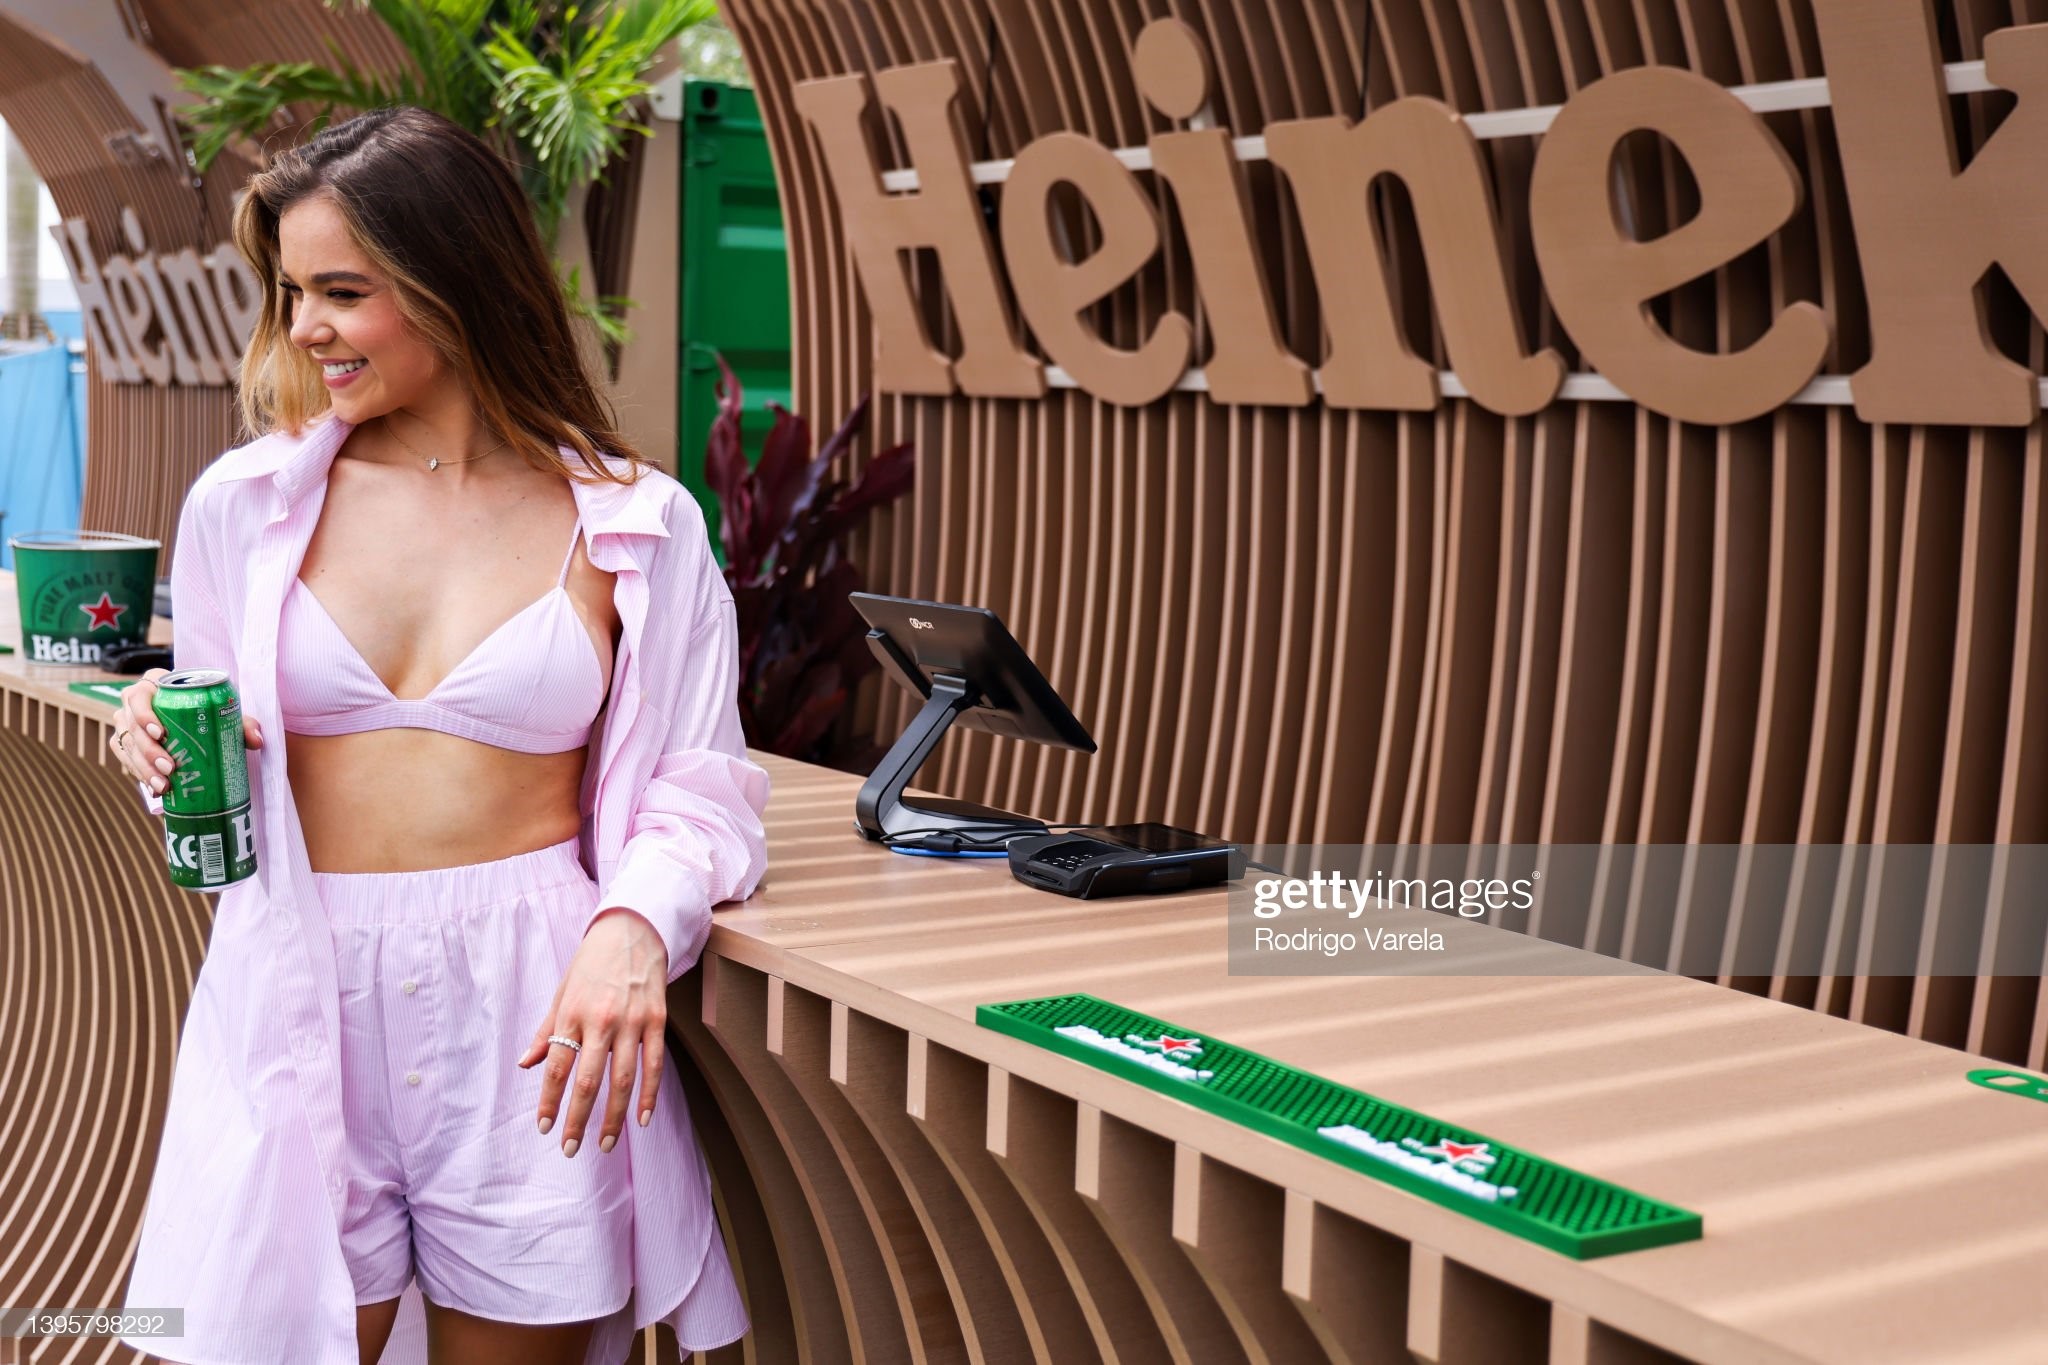 Hailee Steinfeld as part of the Heineken 'When you drive never drink' campaign launch ahead of the F1 Grand Prix of Miami at the Miami International Autodrome on May 06, 2022 in Miami, Florida. 